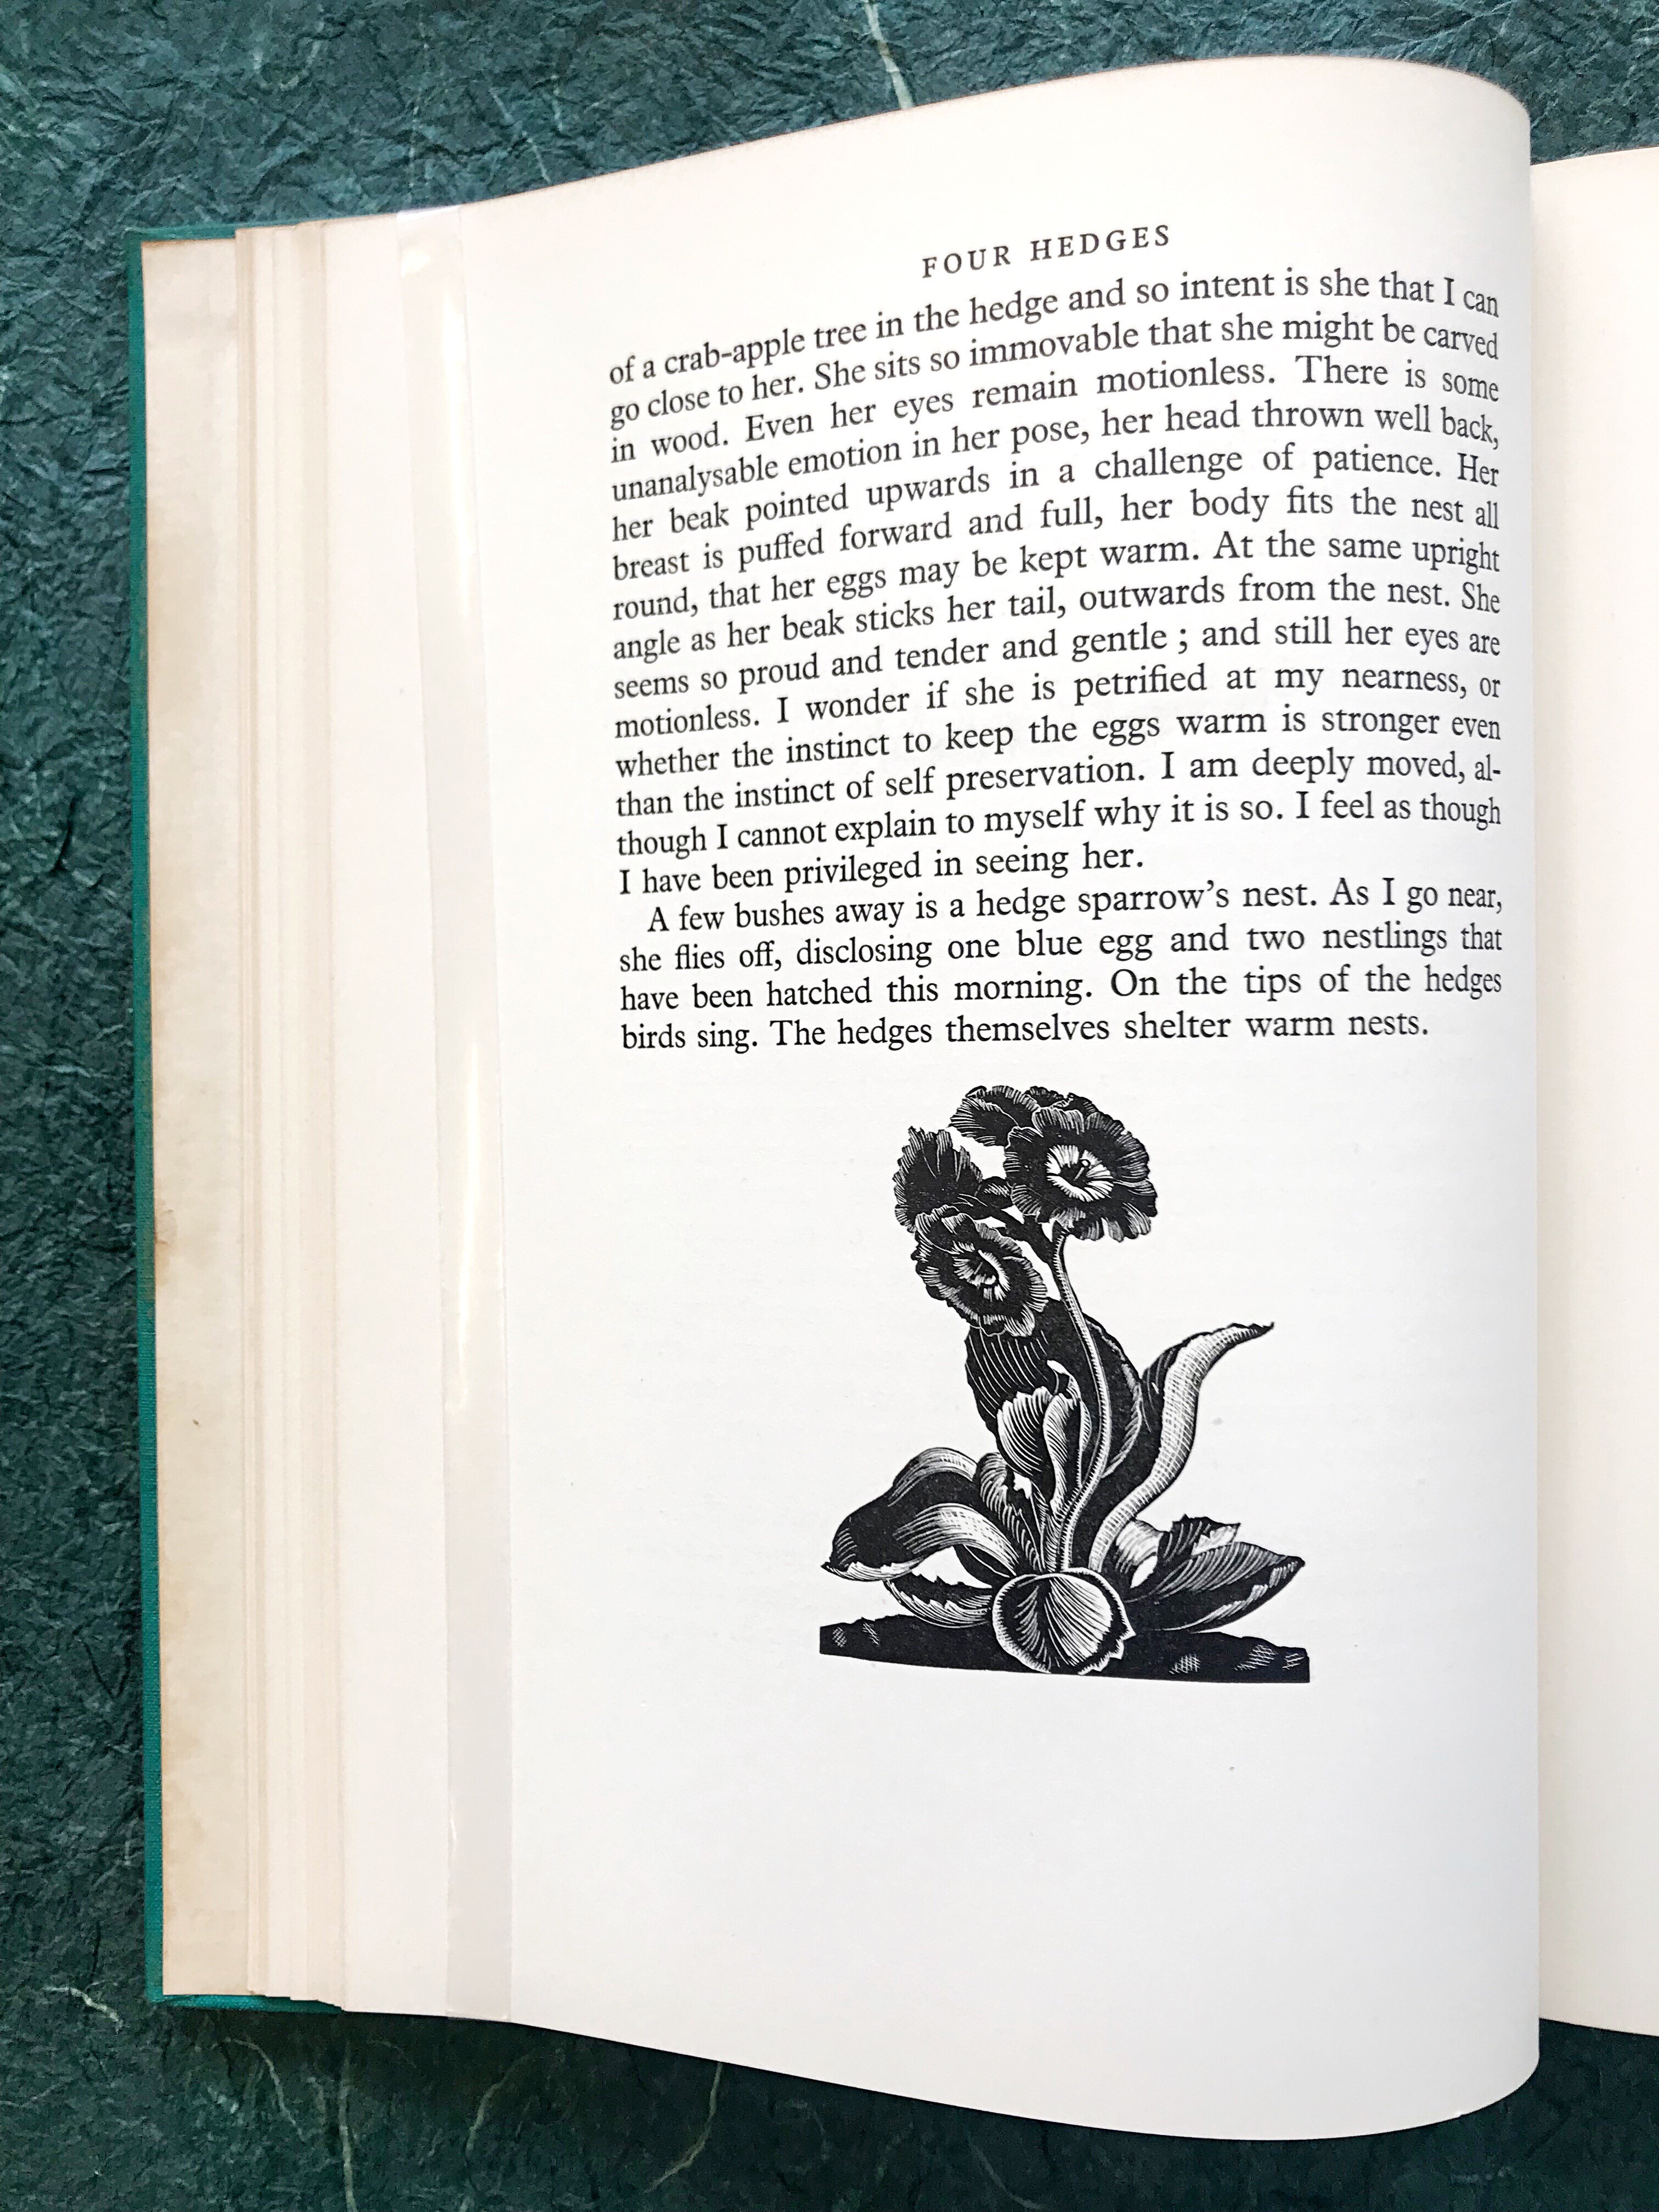 page from The Farmer’s Year by Clare Leighton with an illustration of a flower